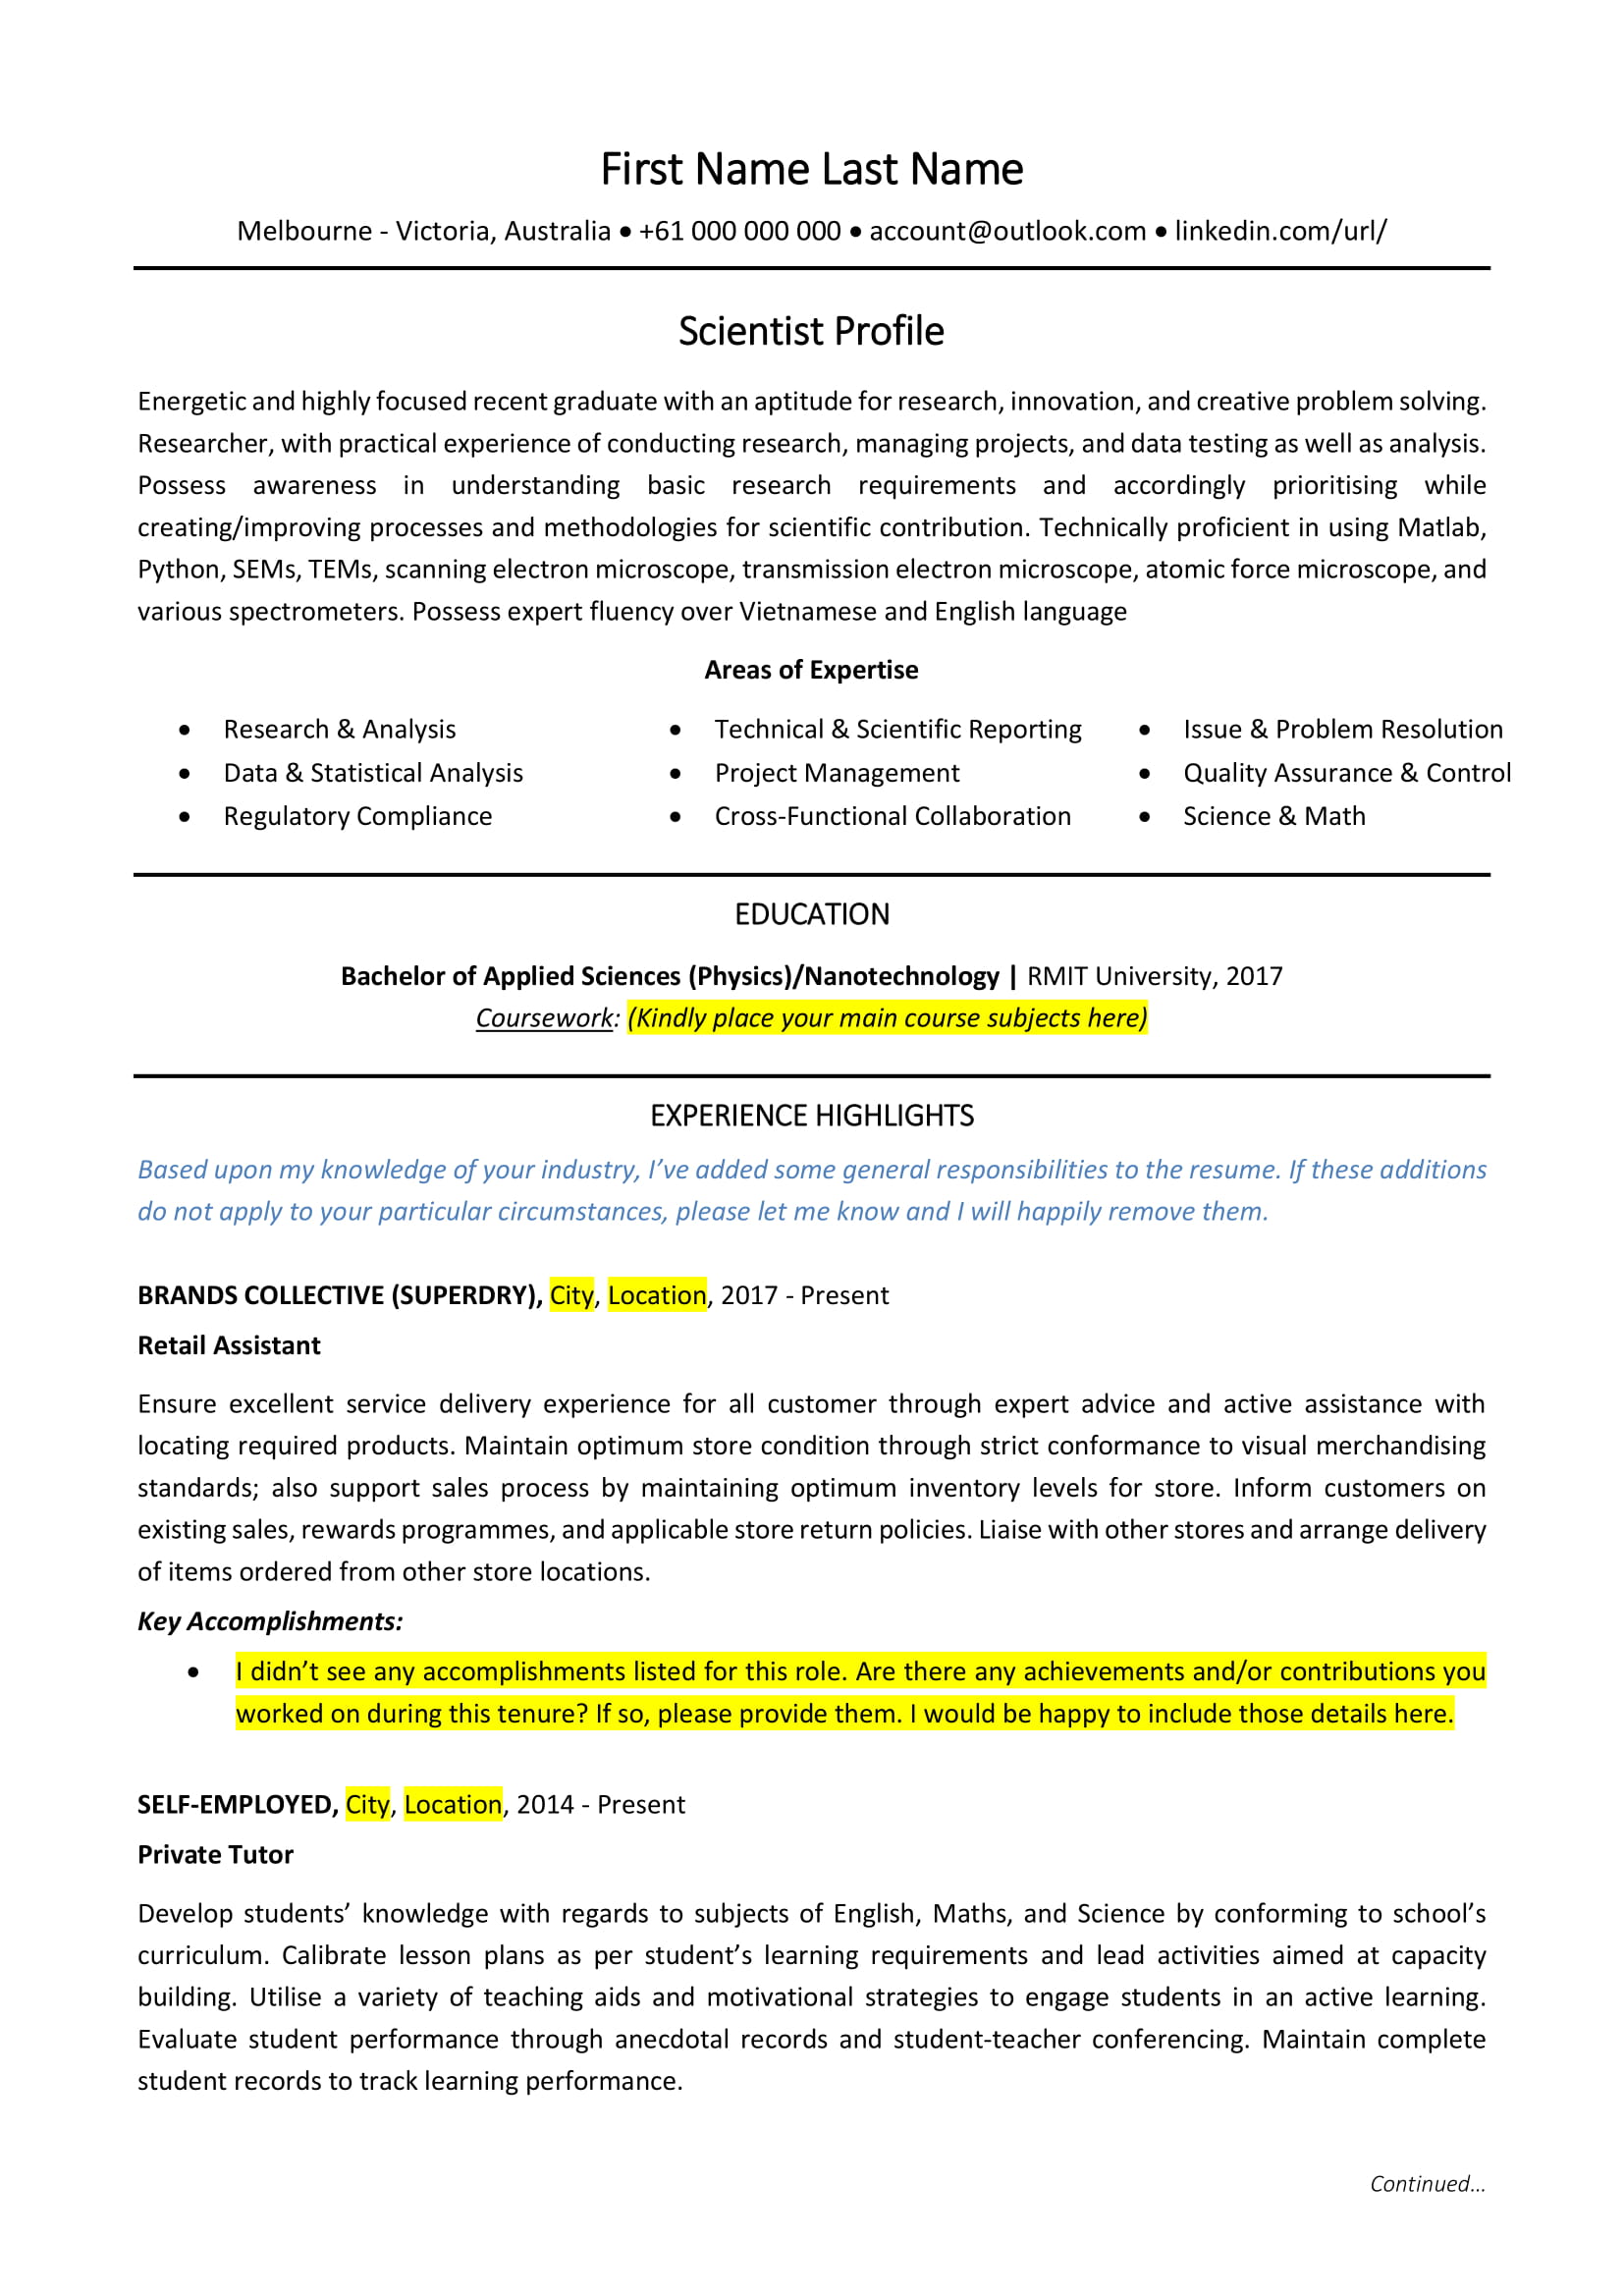 Research and Analysis Resume Sample